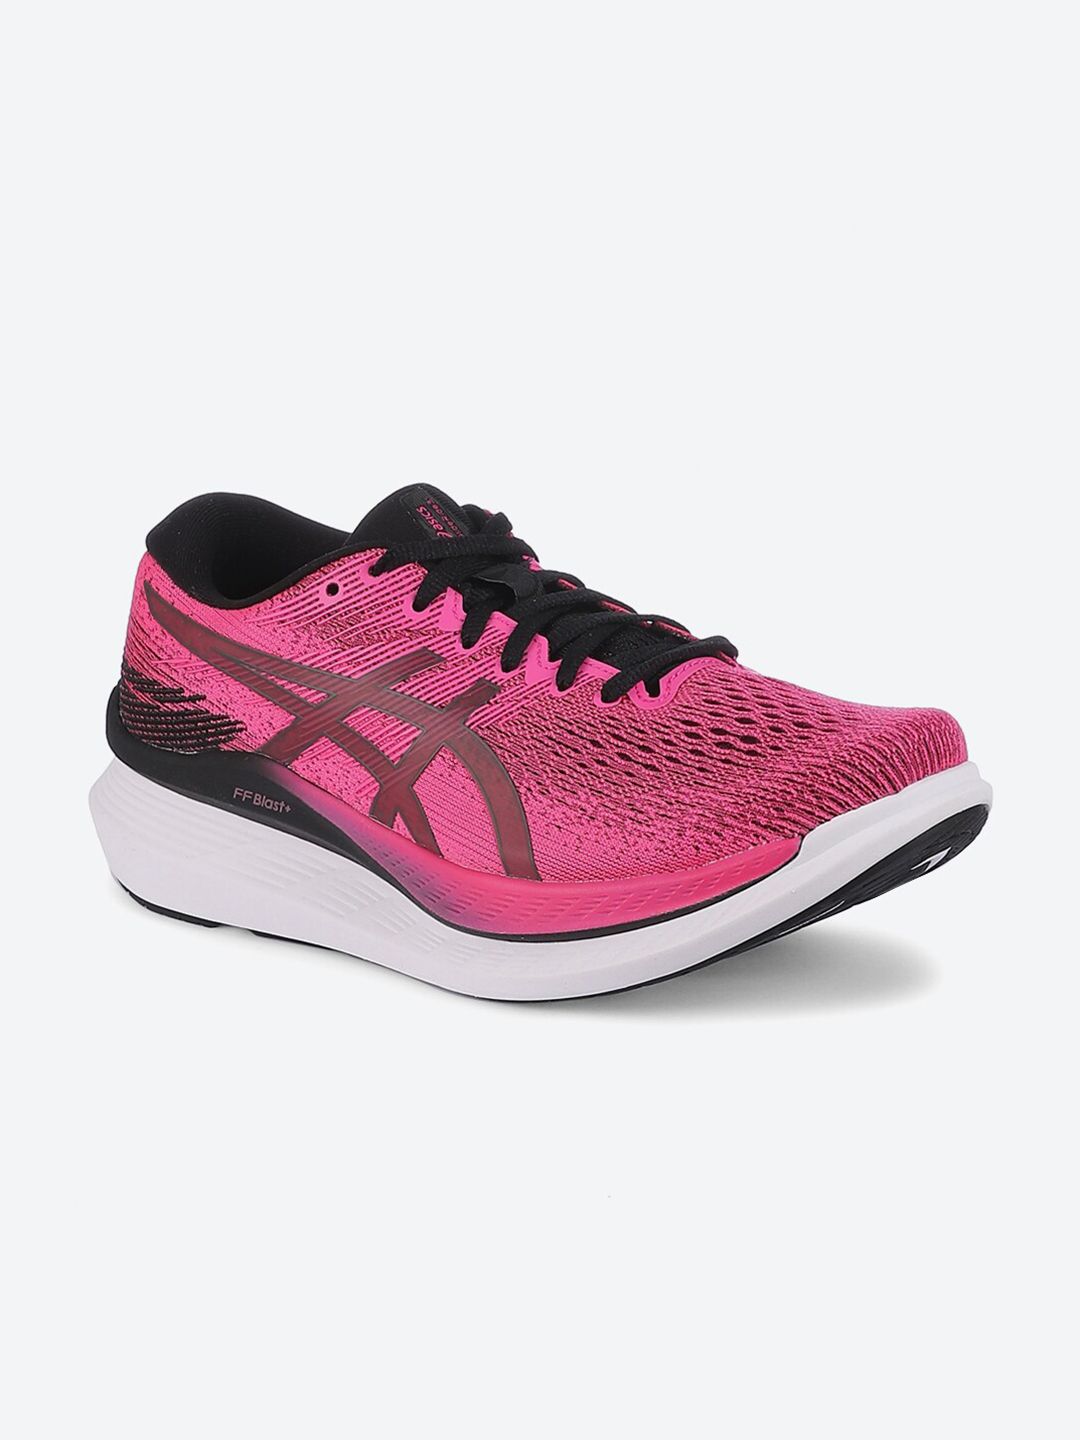 ASICS Women Pink Glide Ride 3 Sports Shoes Price in India